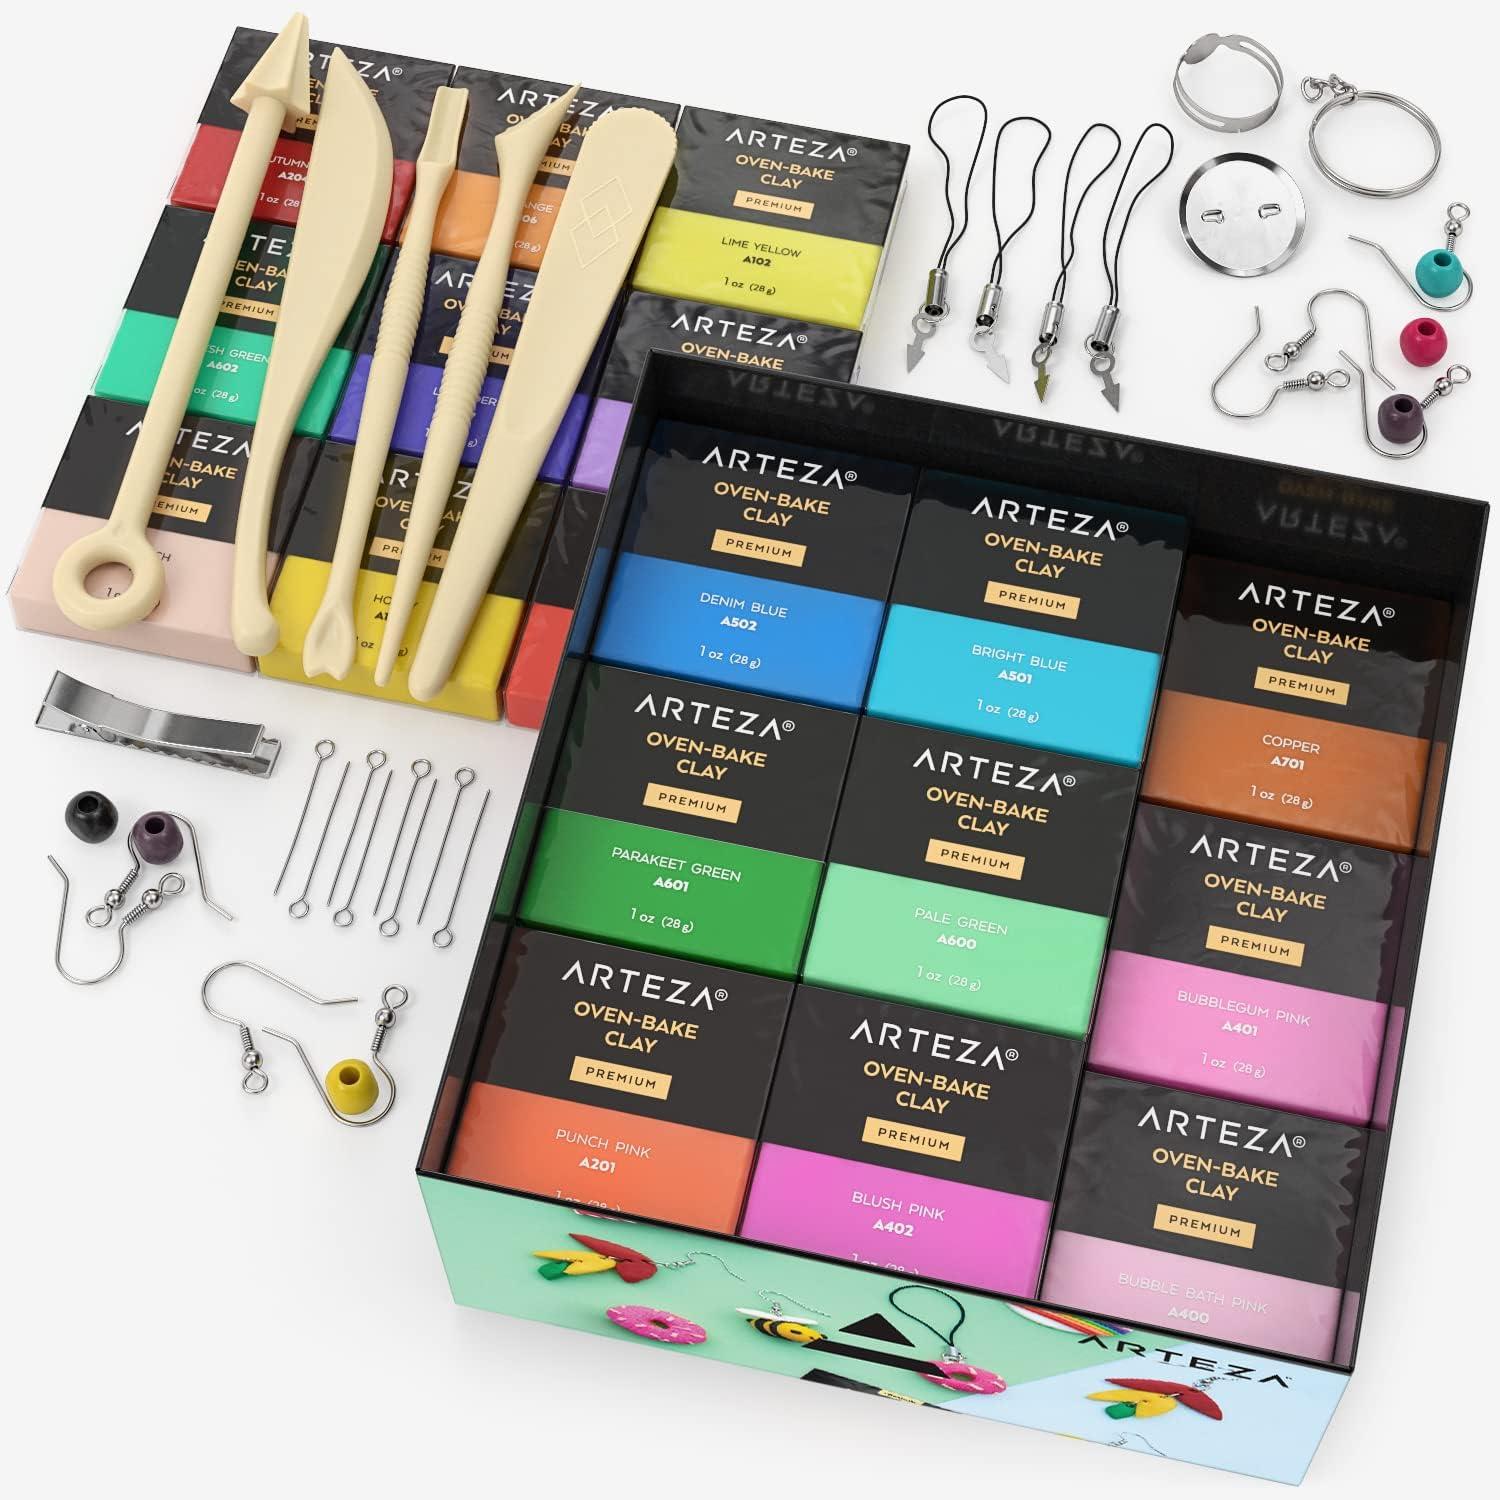 Arteza Polymer Clay Kit Modeling Clay Oven Bake for Adults and Teens with 5  Sculpting Tools 42 Colors Made for Clay Earrings Jewelry Making and Crafts  Set of 42